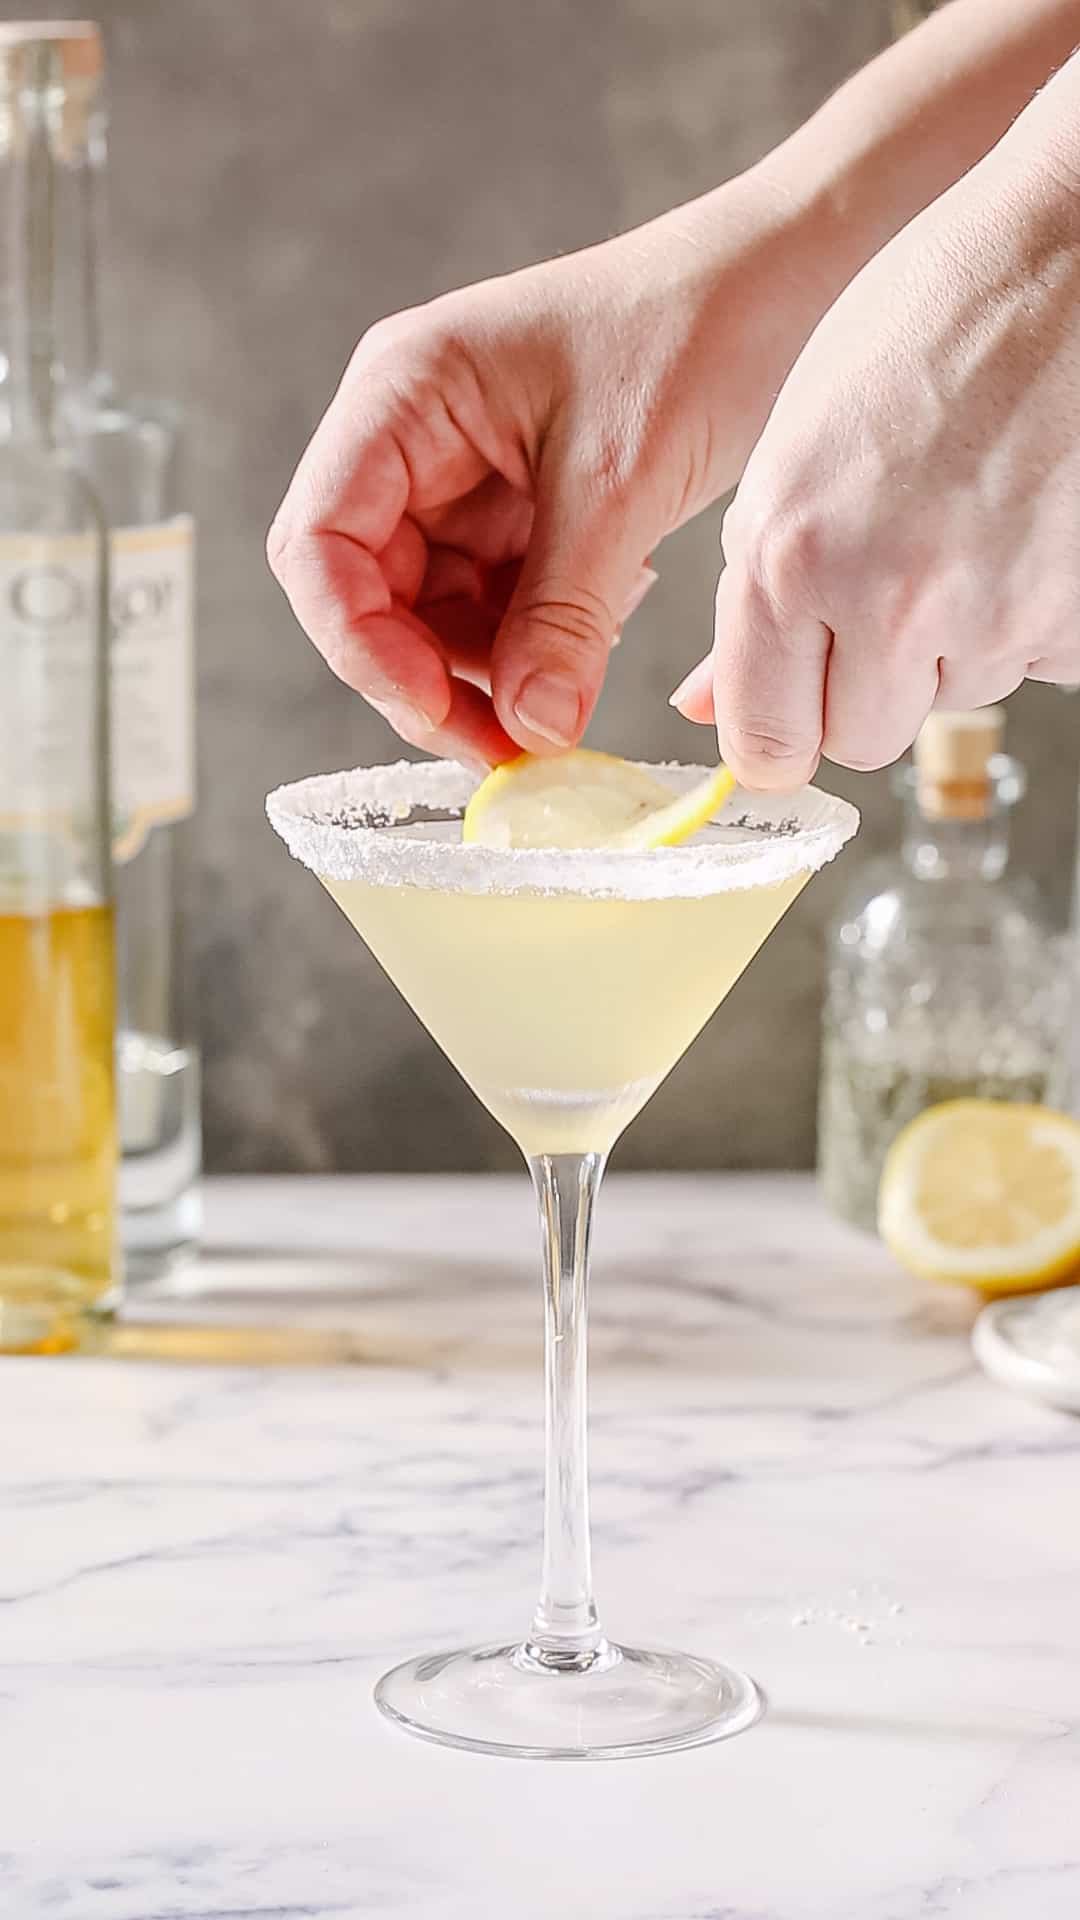 Hands adding a lemon slice to the surface of a yellow cocktail in a martini glass with a sugared rim.